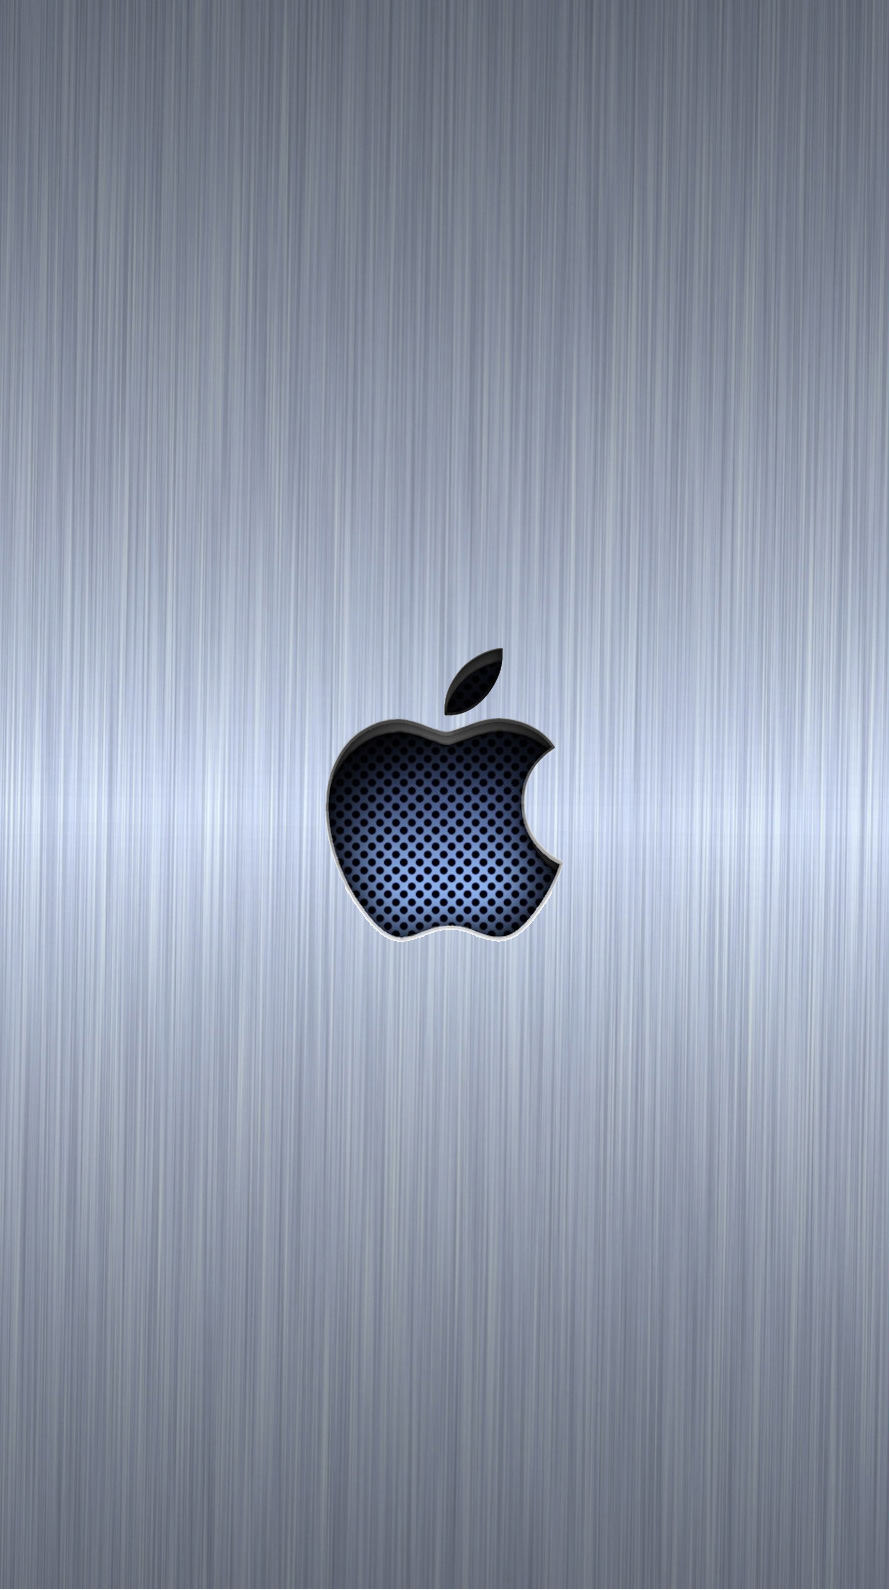 Silver Apple Cool | wallpaper.sc iPhone6s